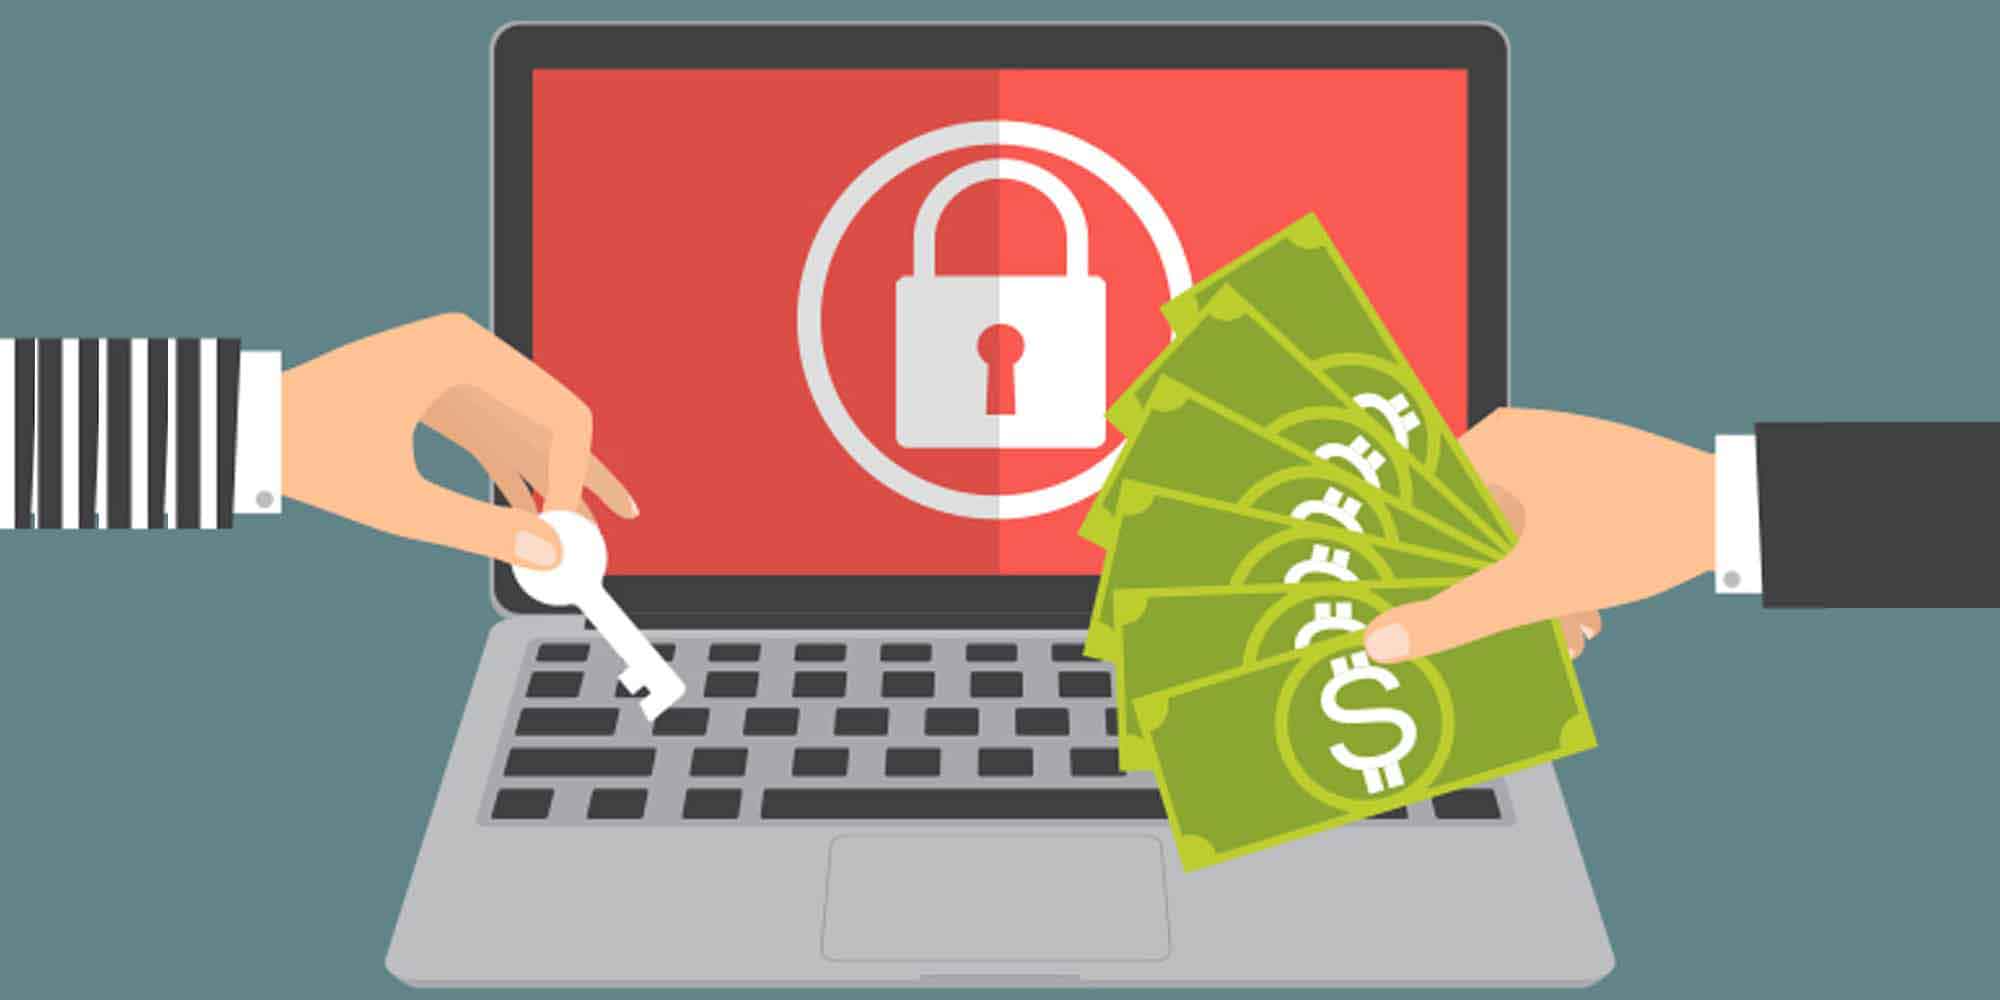  Don’t Get Held Hostage: Innovations Address Ransomware